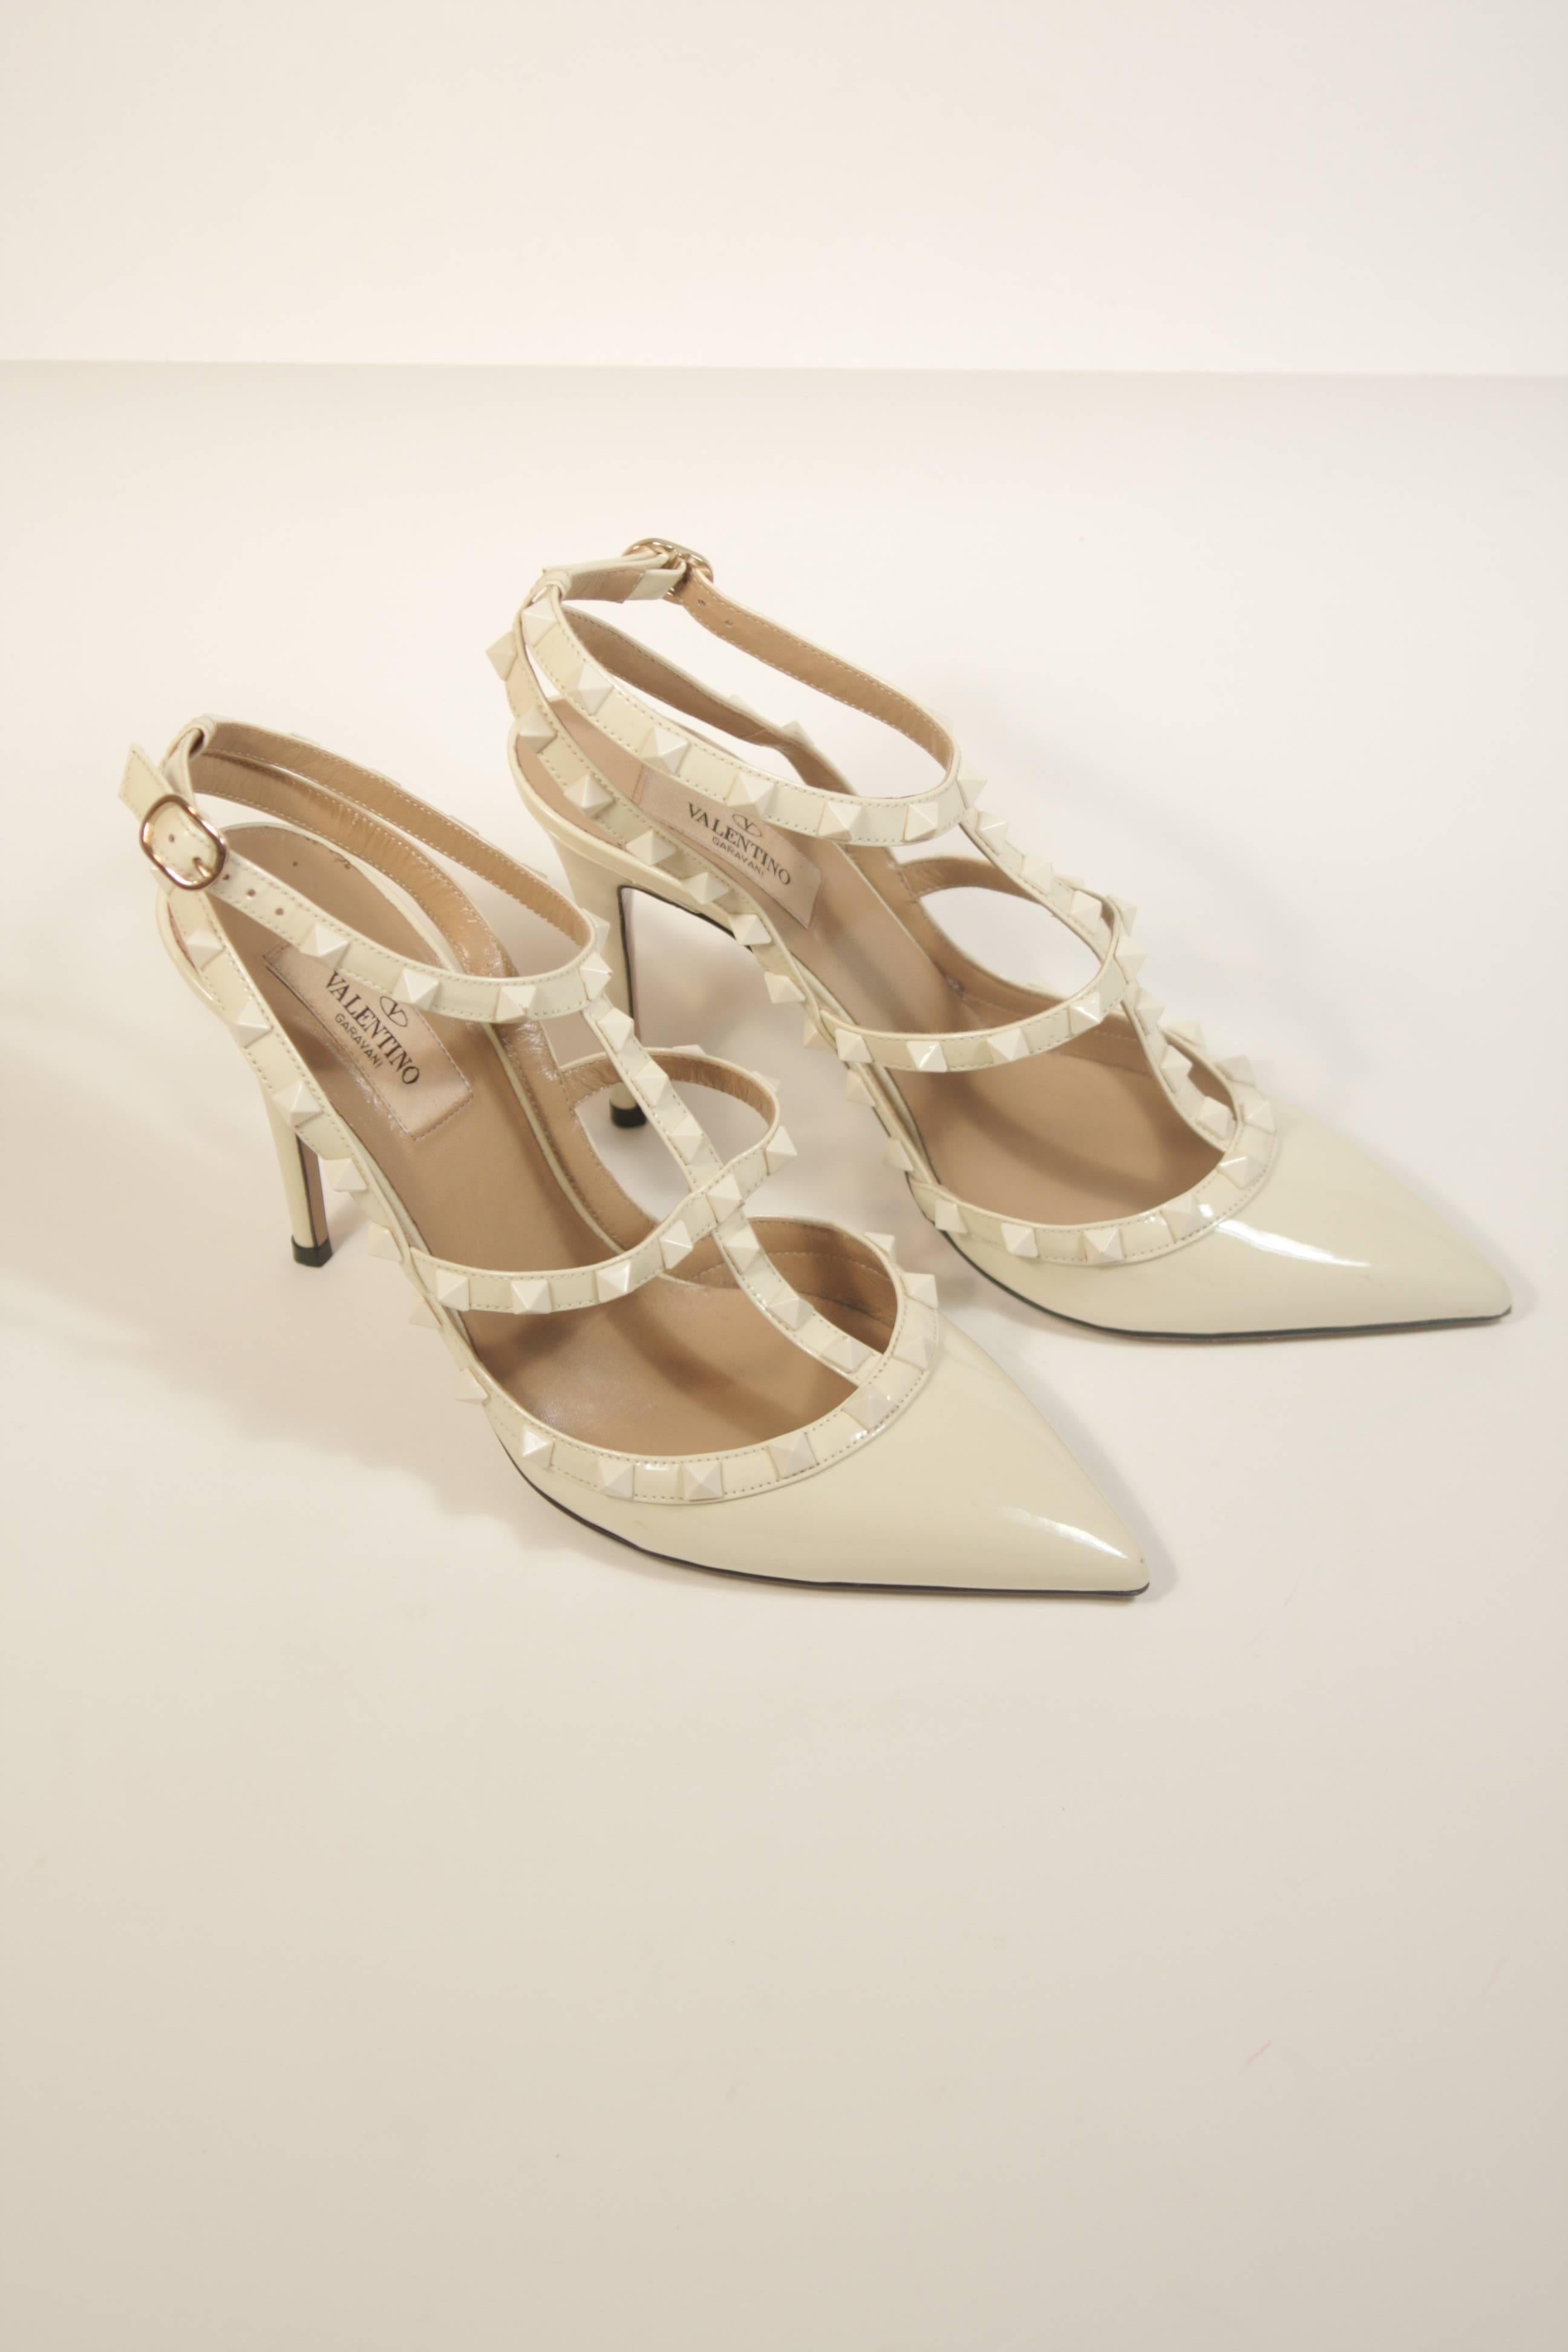 VALENTINO Rock Stud Patent Ankle Strap Pumps in Bone Size 39 IT 8 US In Excellent Condition In Los Angeles, CA